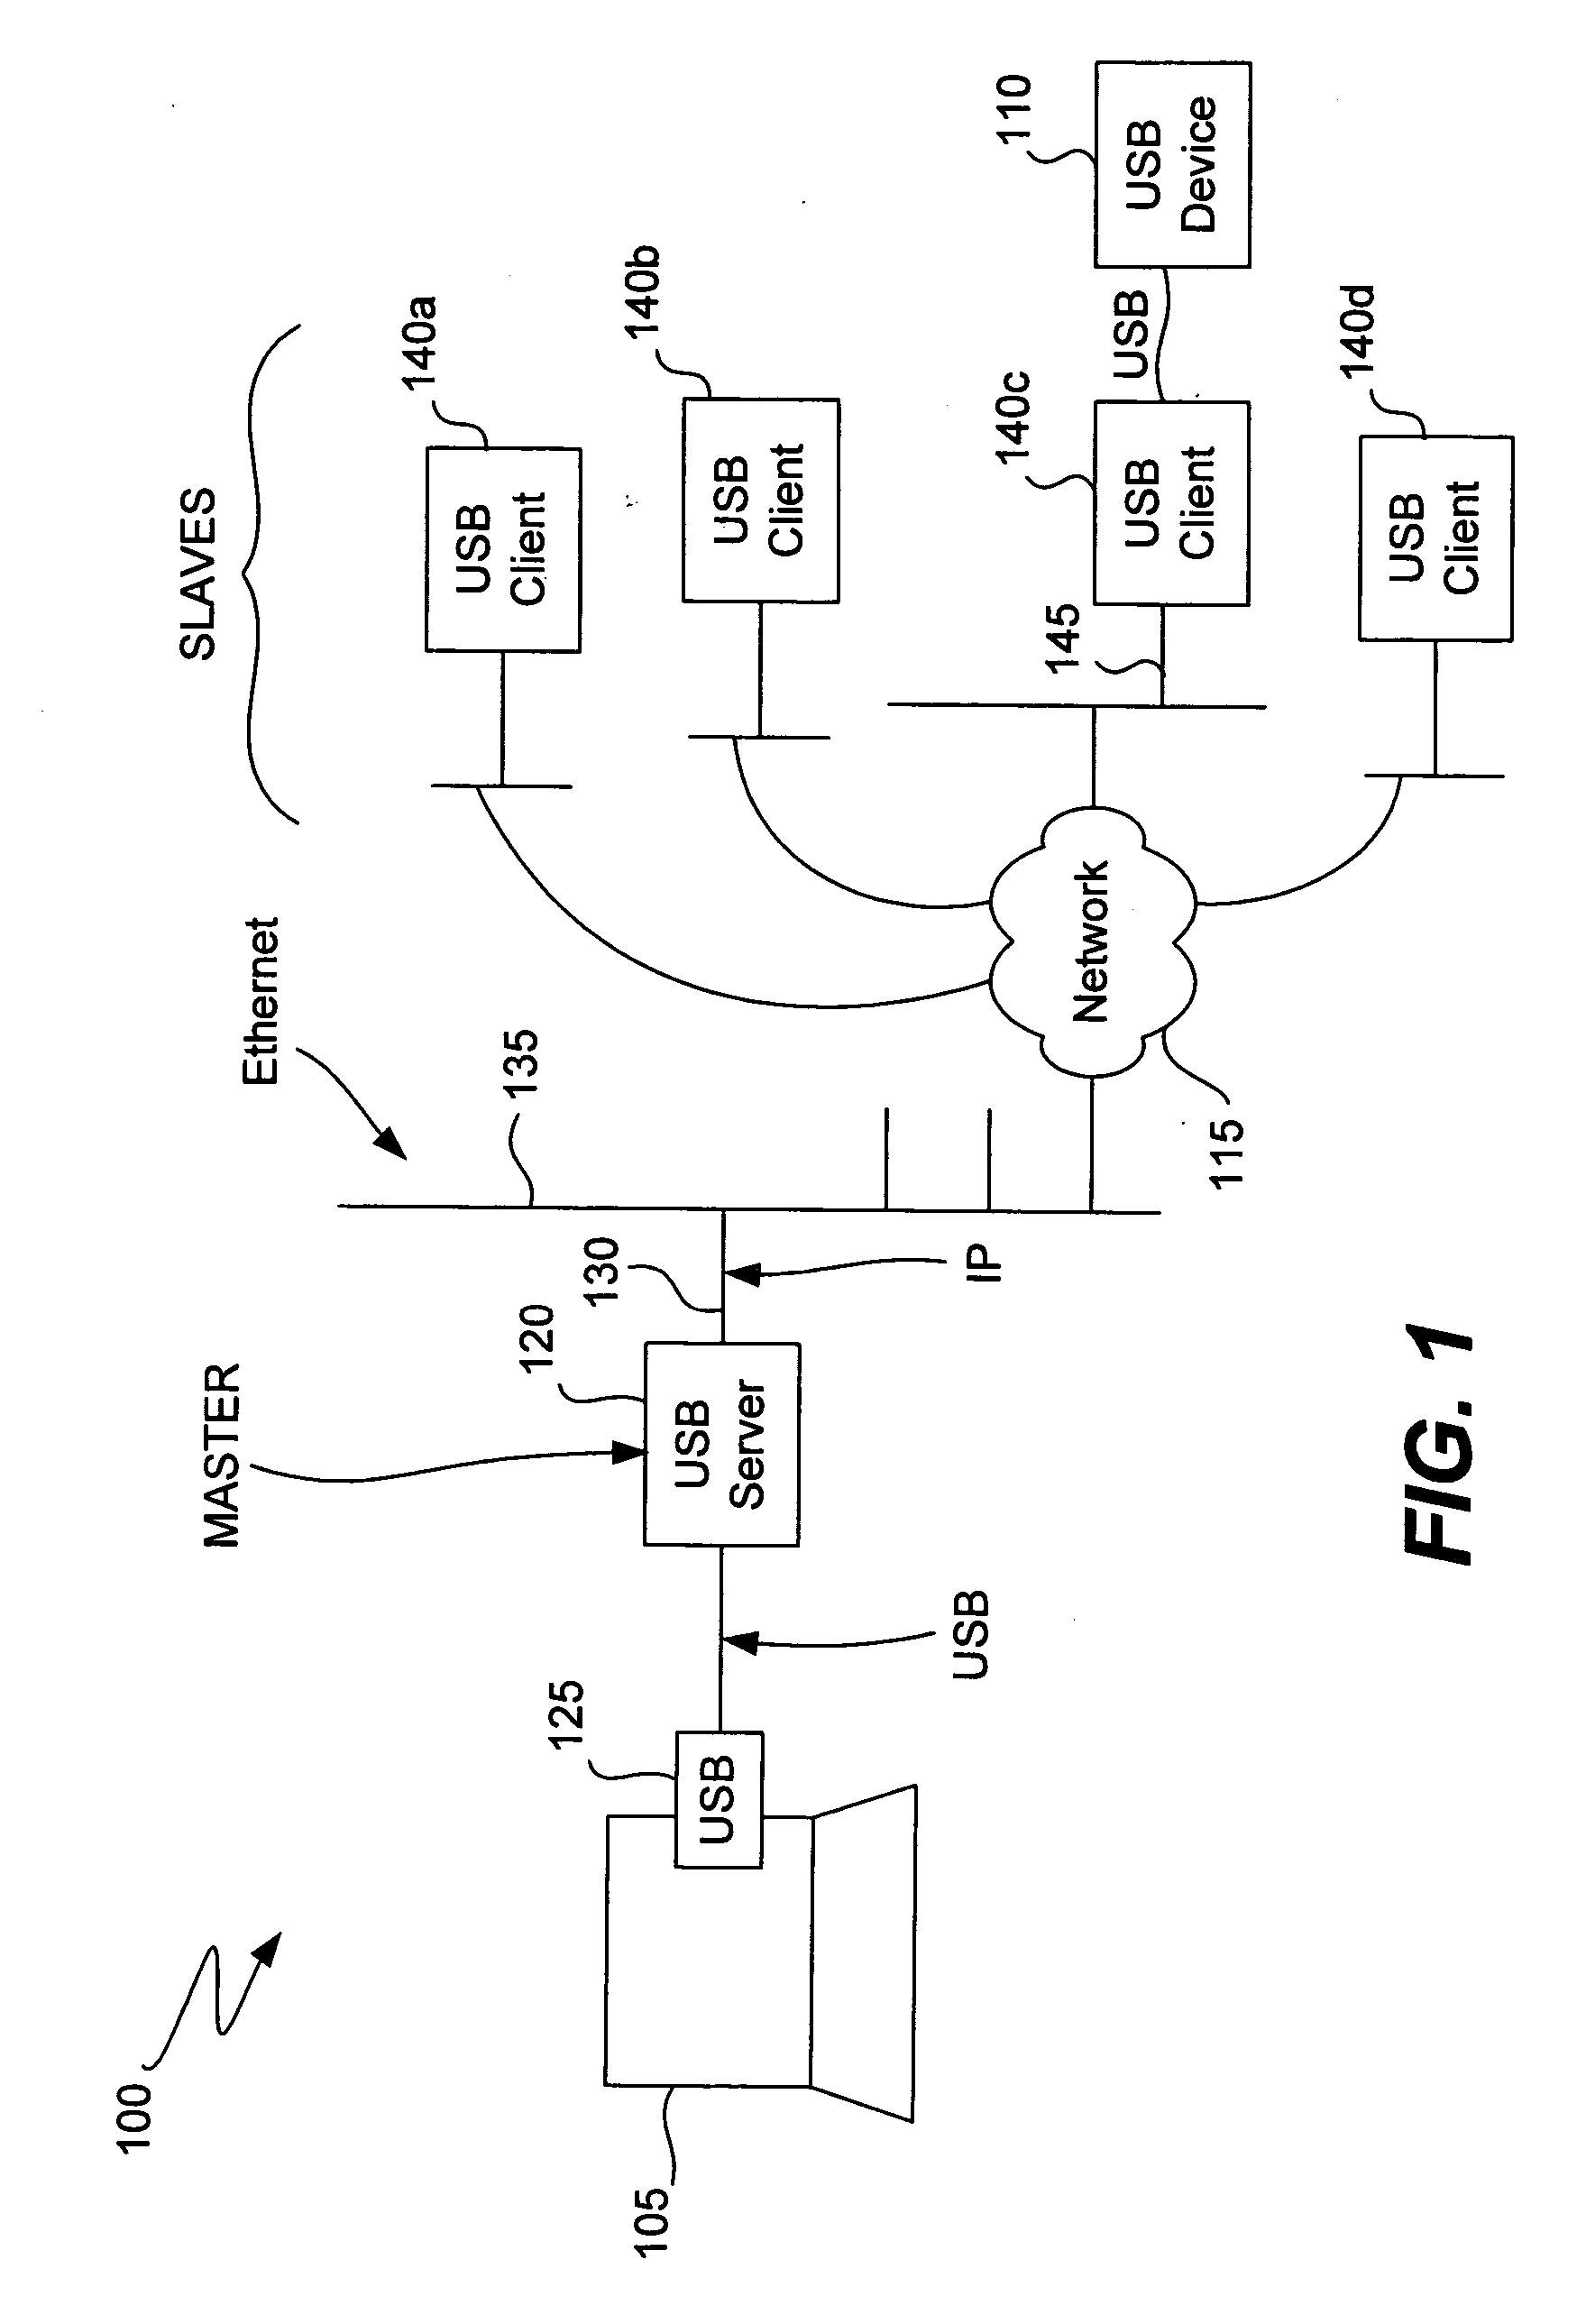 Method and system for controlling transmission of USB messages over a data network between a USB device and a plurality of host computers